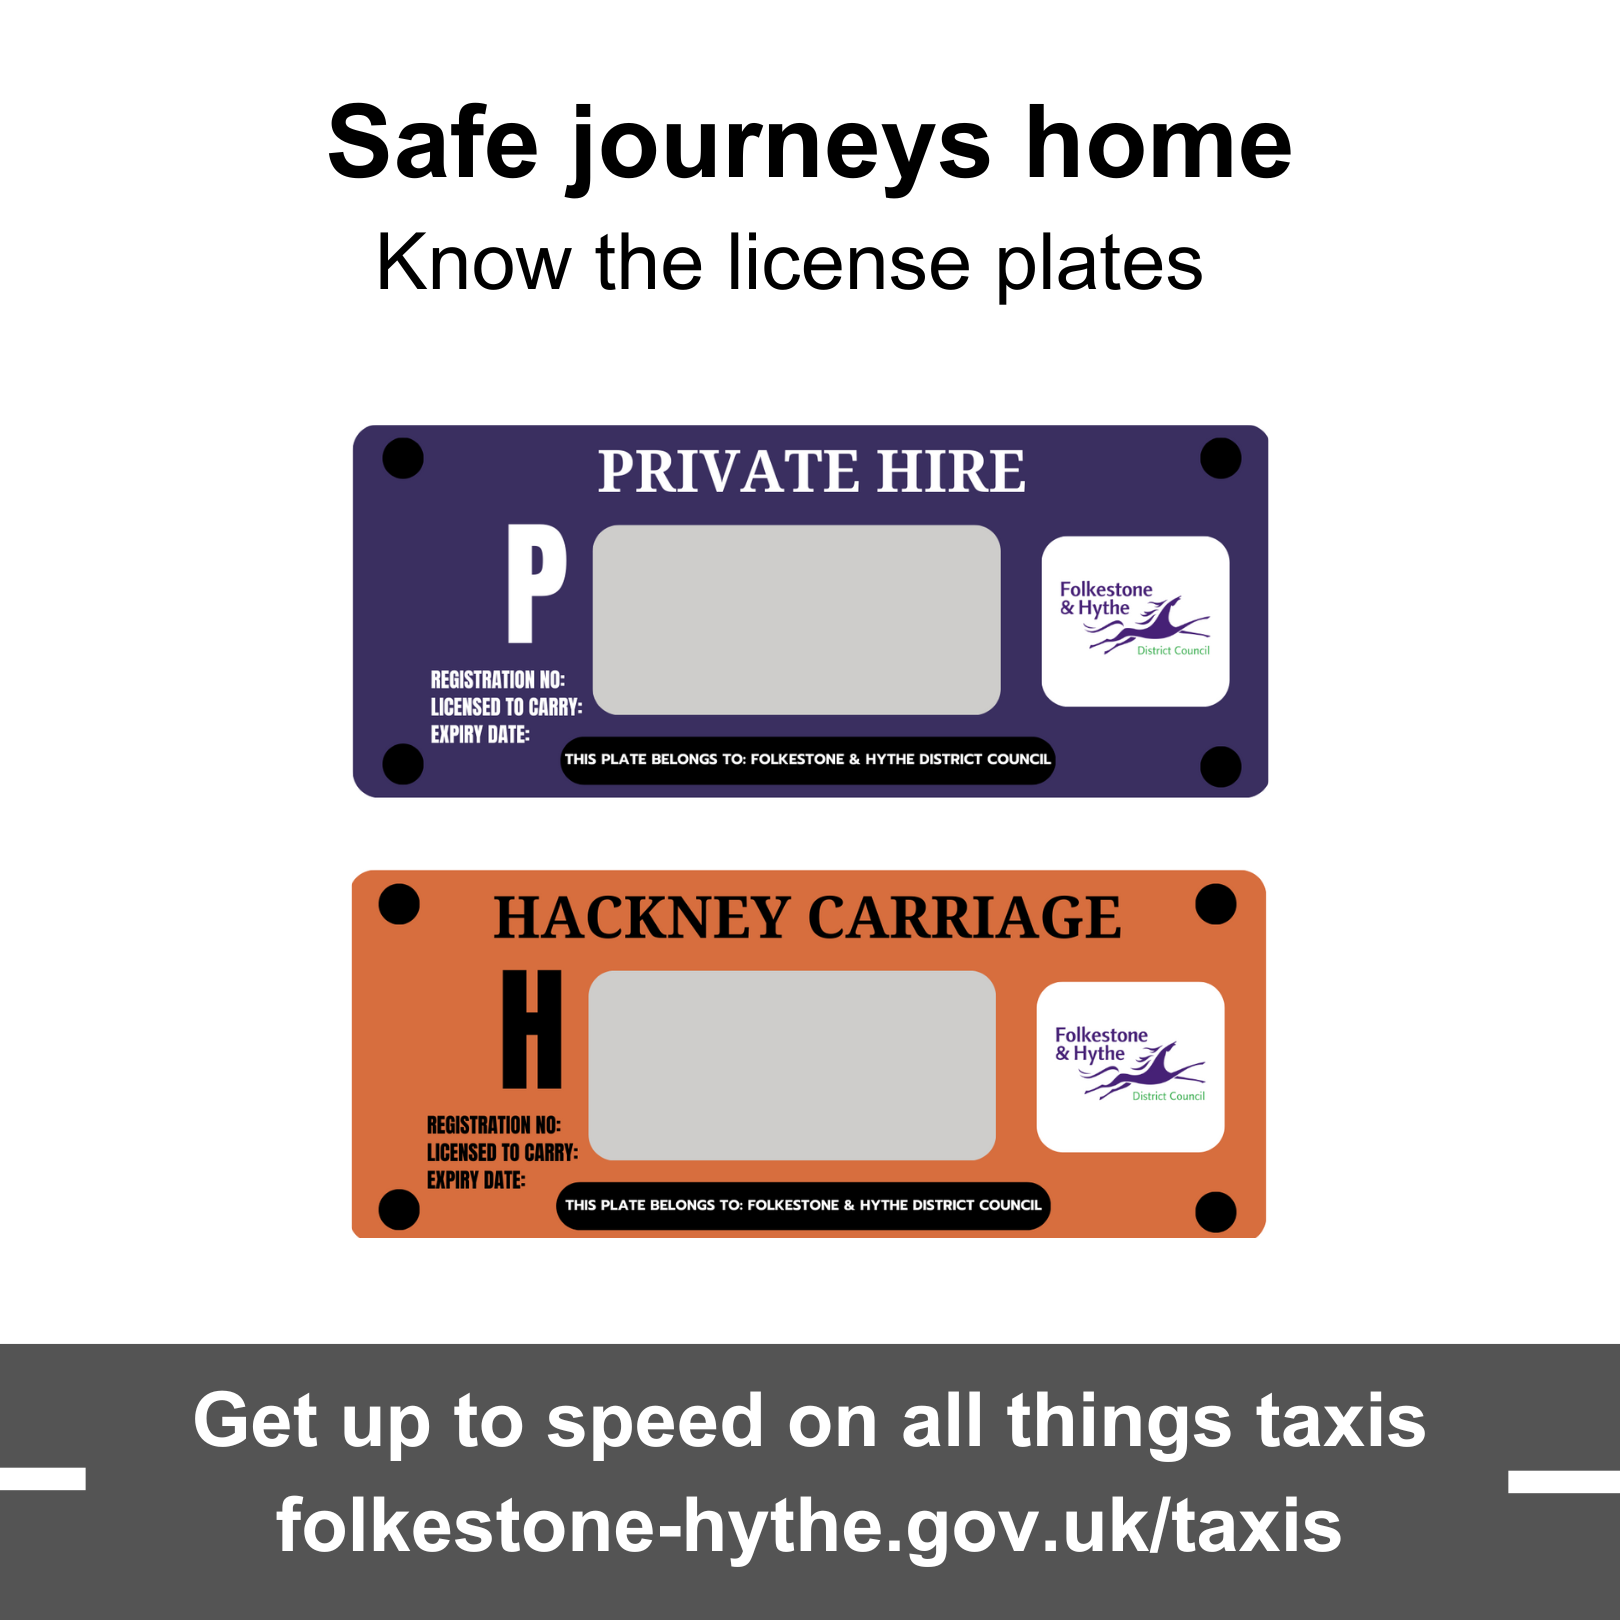 An image of the FHDC taxi license plates